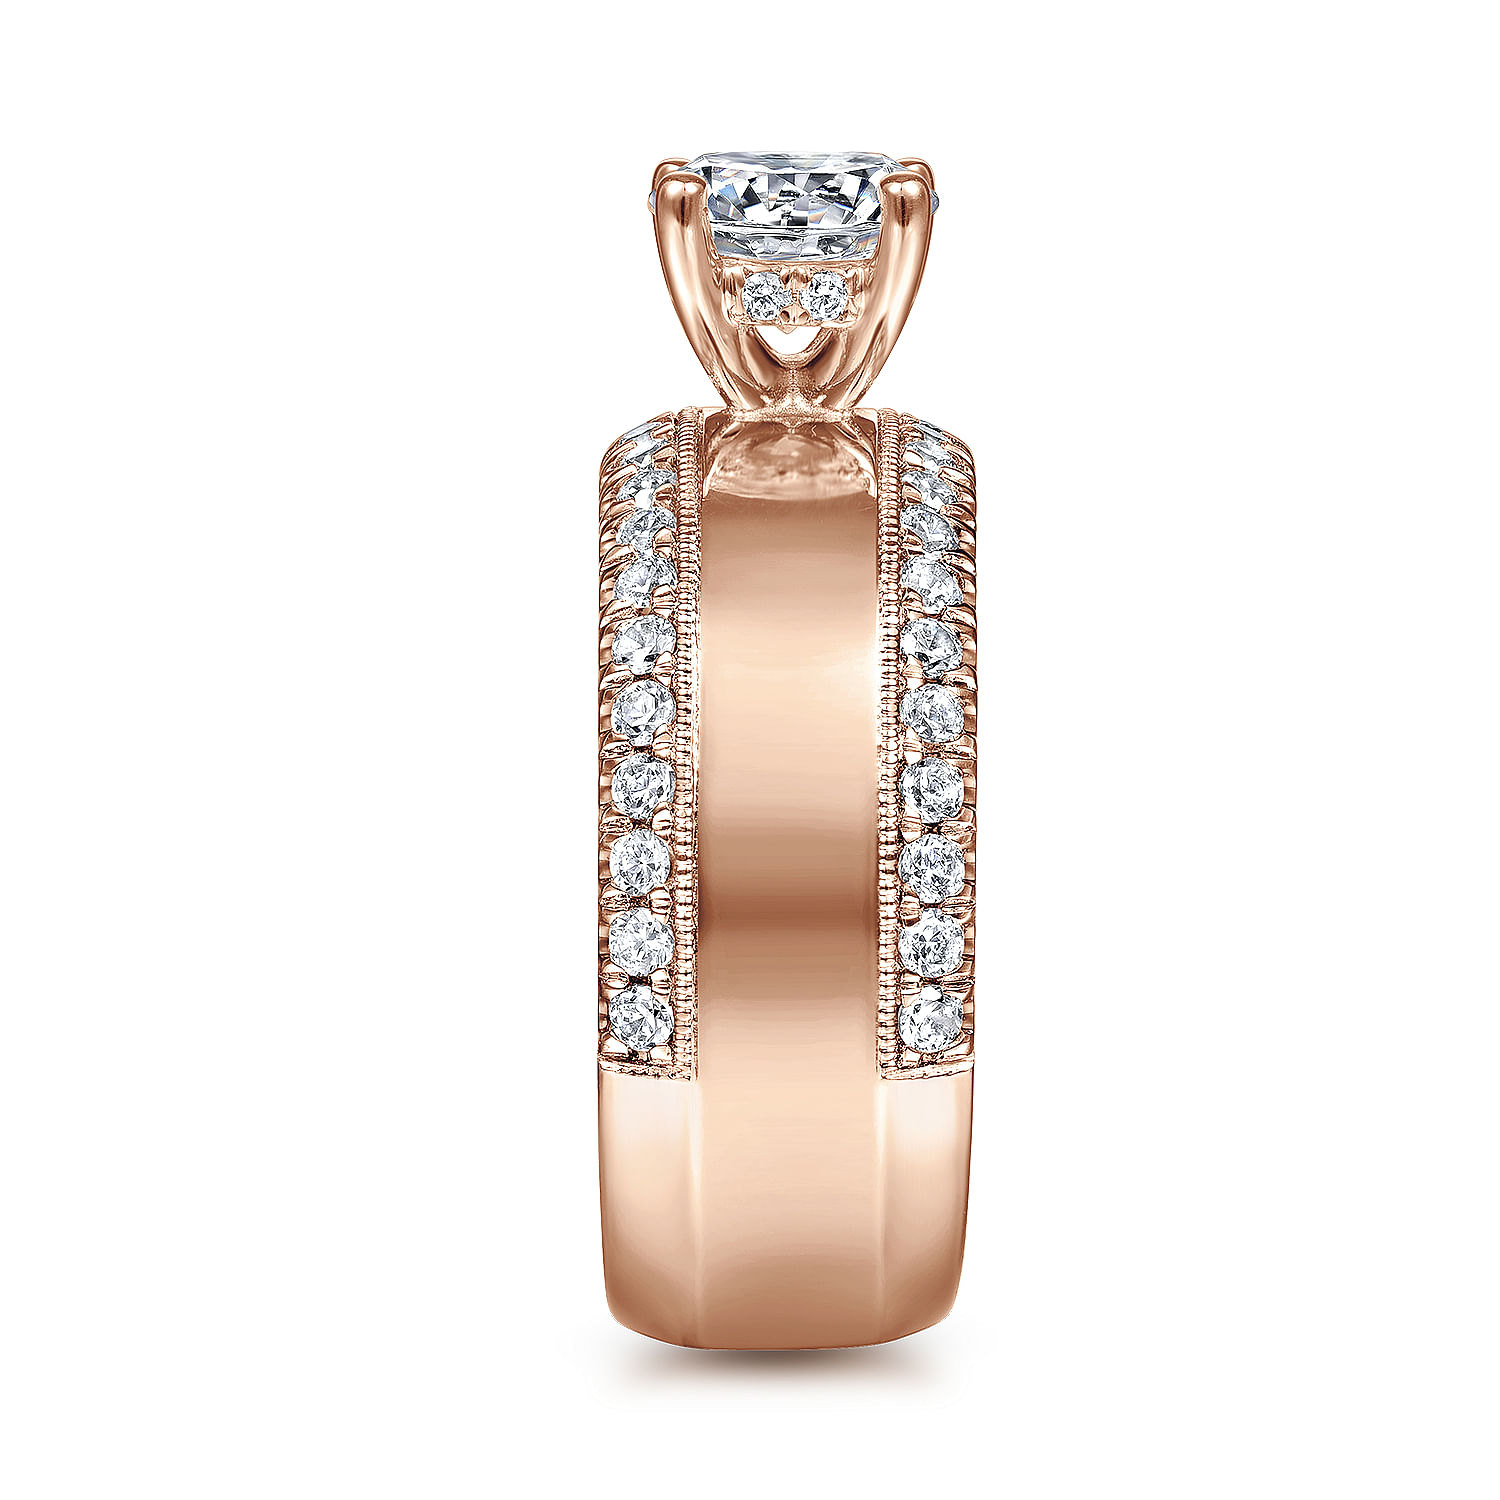 14K Rose Gold Round Wide Band Diamond Engagement Ring